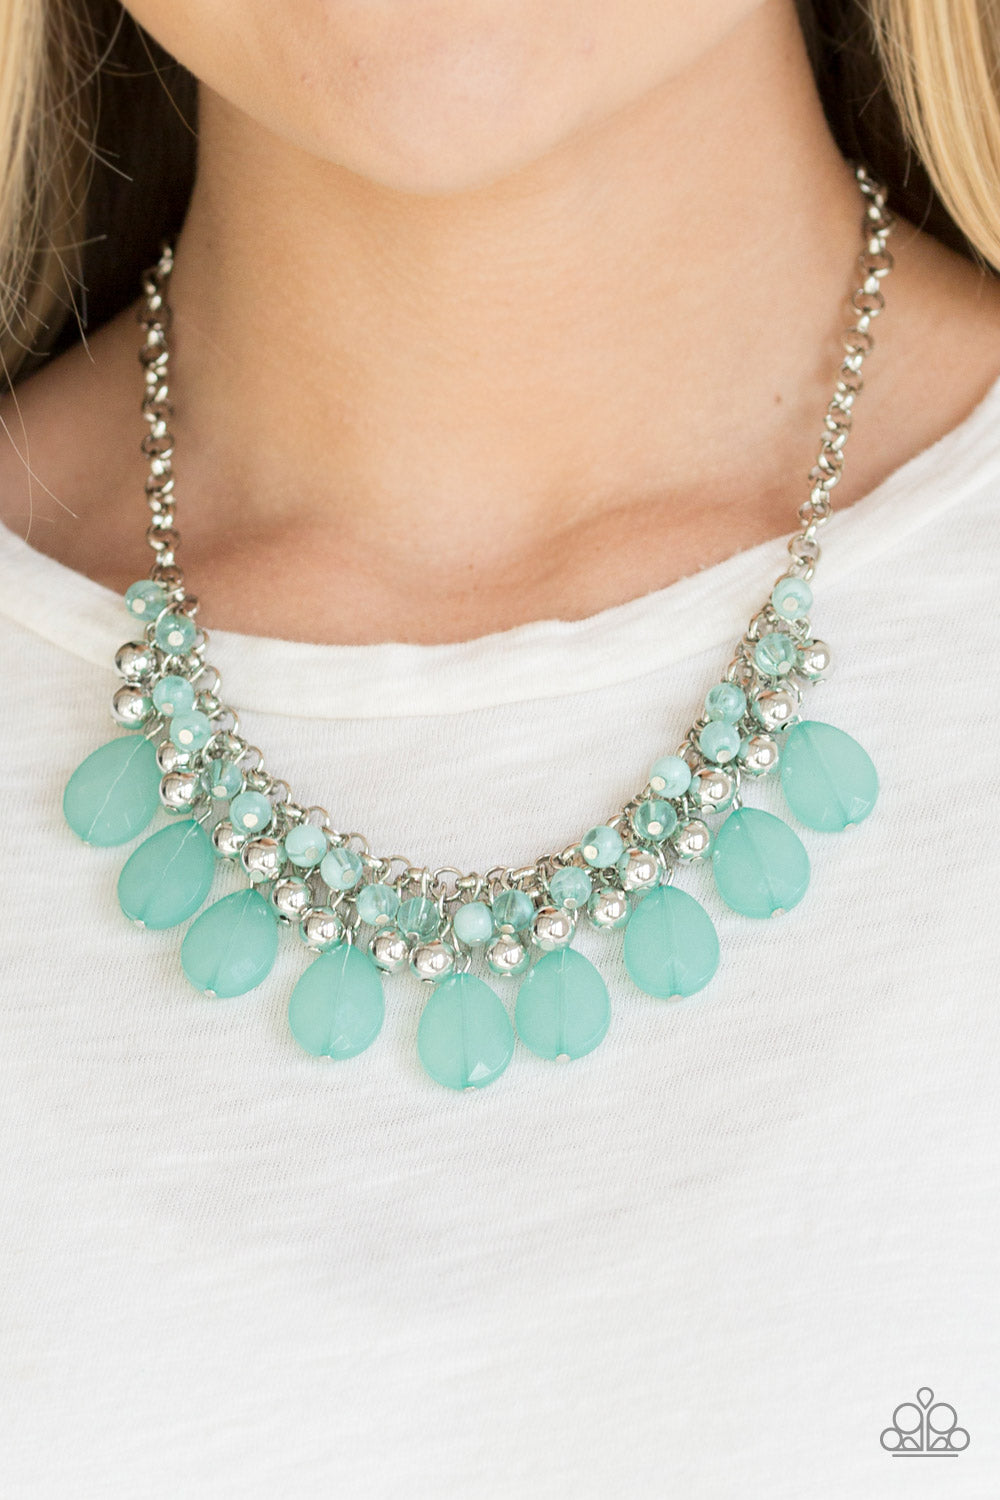 Paparazzi Trending Tropicana - Green Beads - Silver Necklace and matching Earrings - $5 Jewelry With Ashley Swint